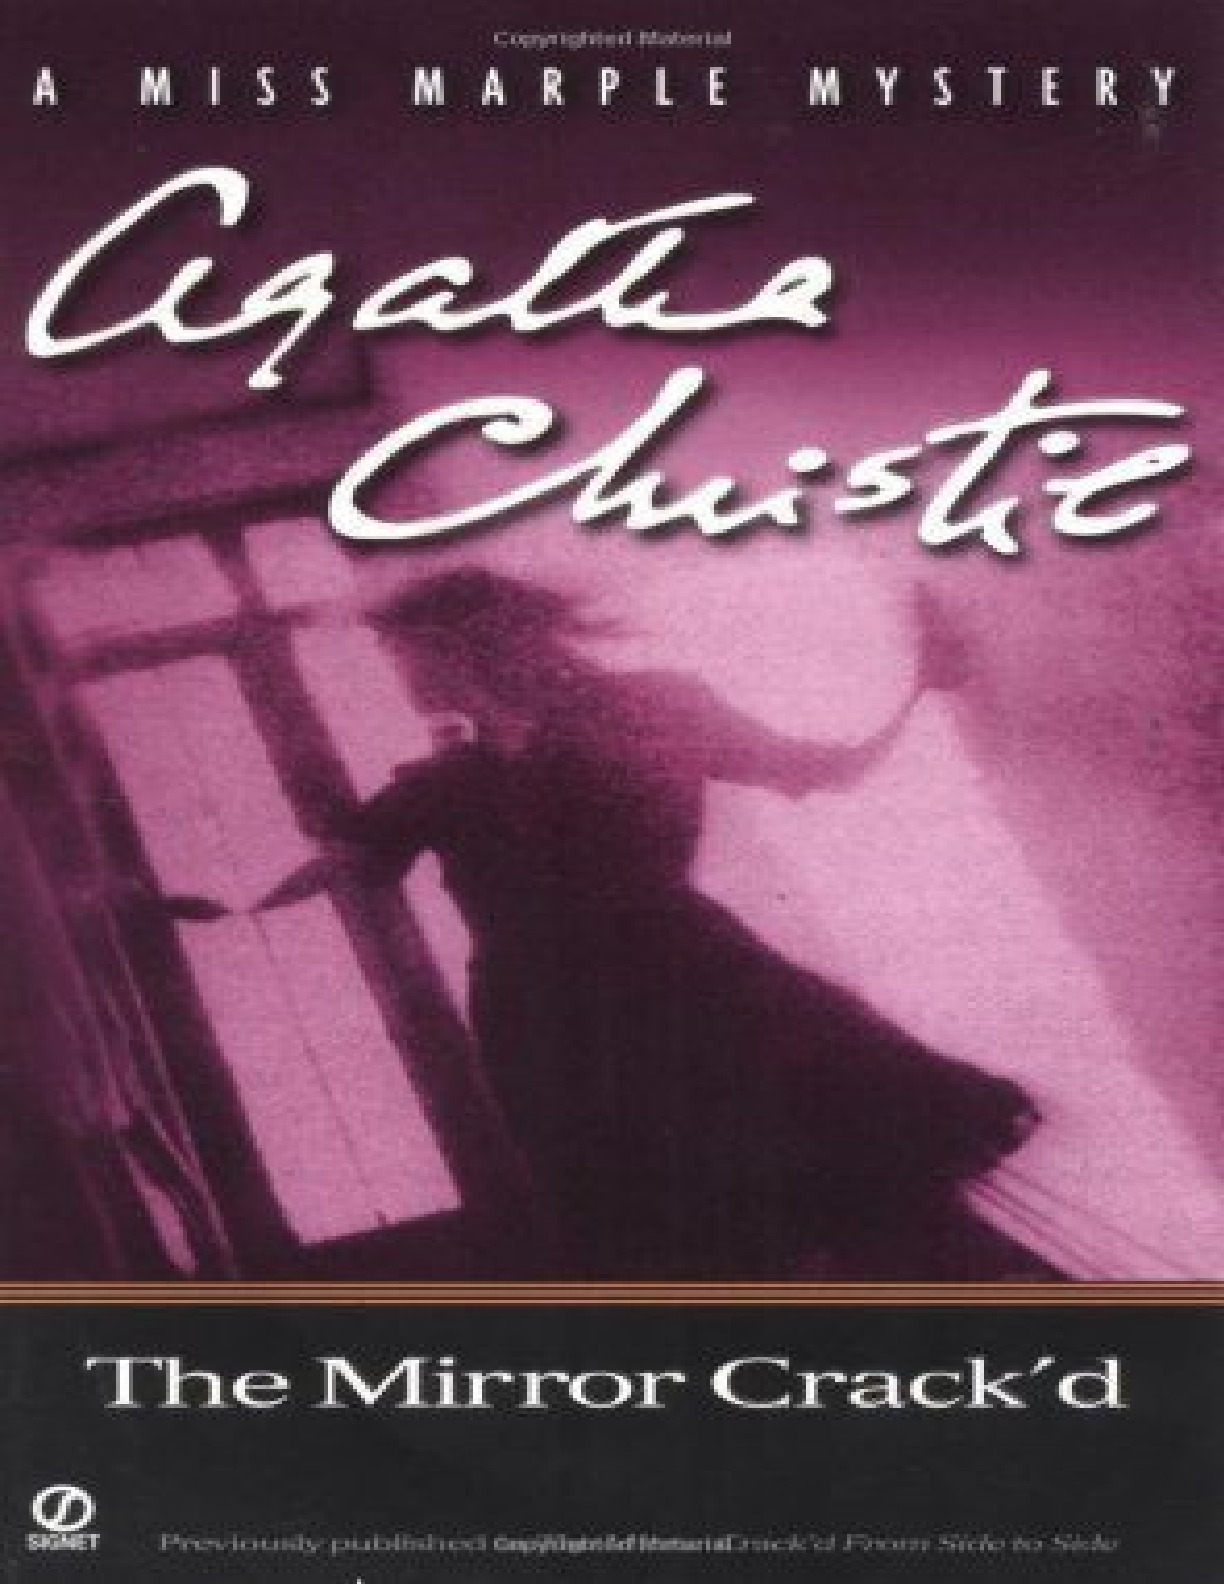 mirror crack’d from side to side, The – Agatha Christie